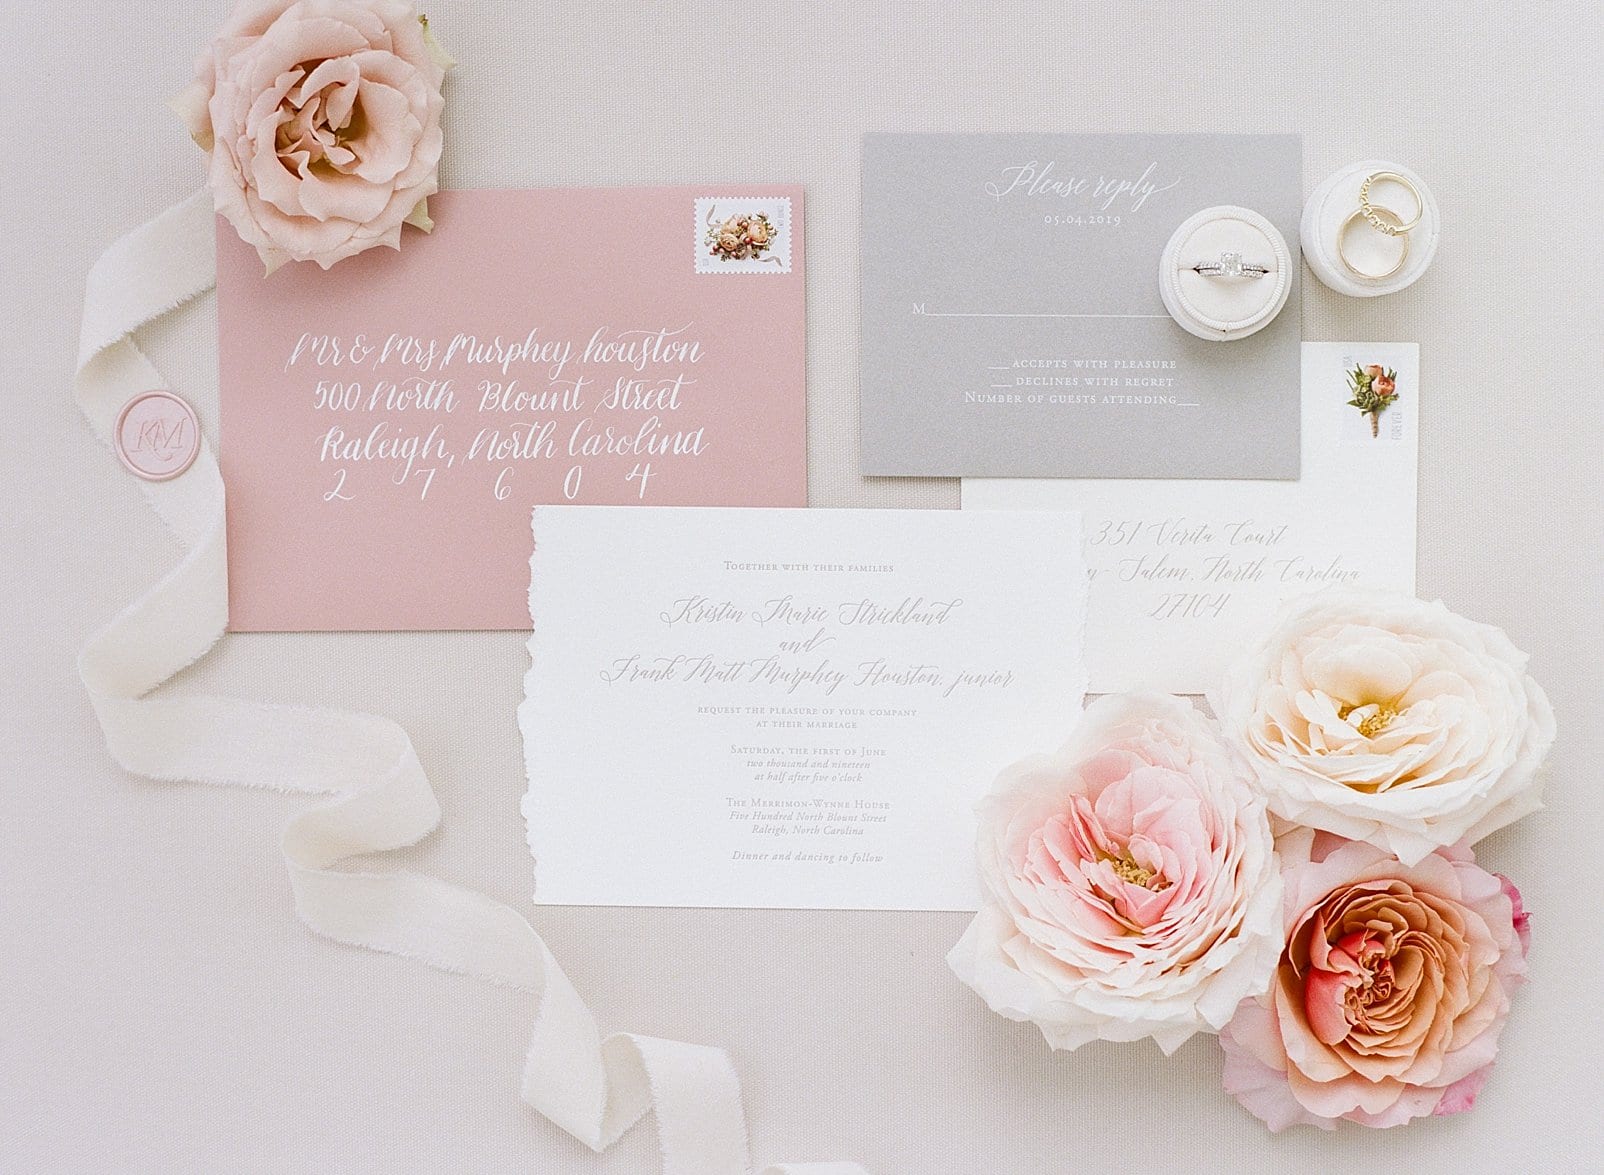 One and Only Paper landscape wedding invitation on white paper with a blush colored envelope photo